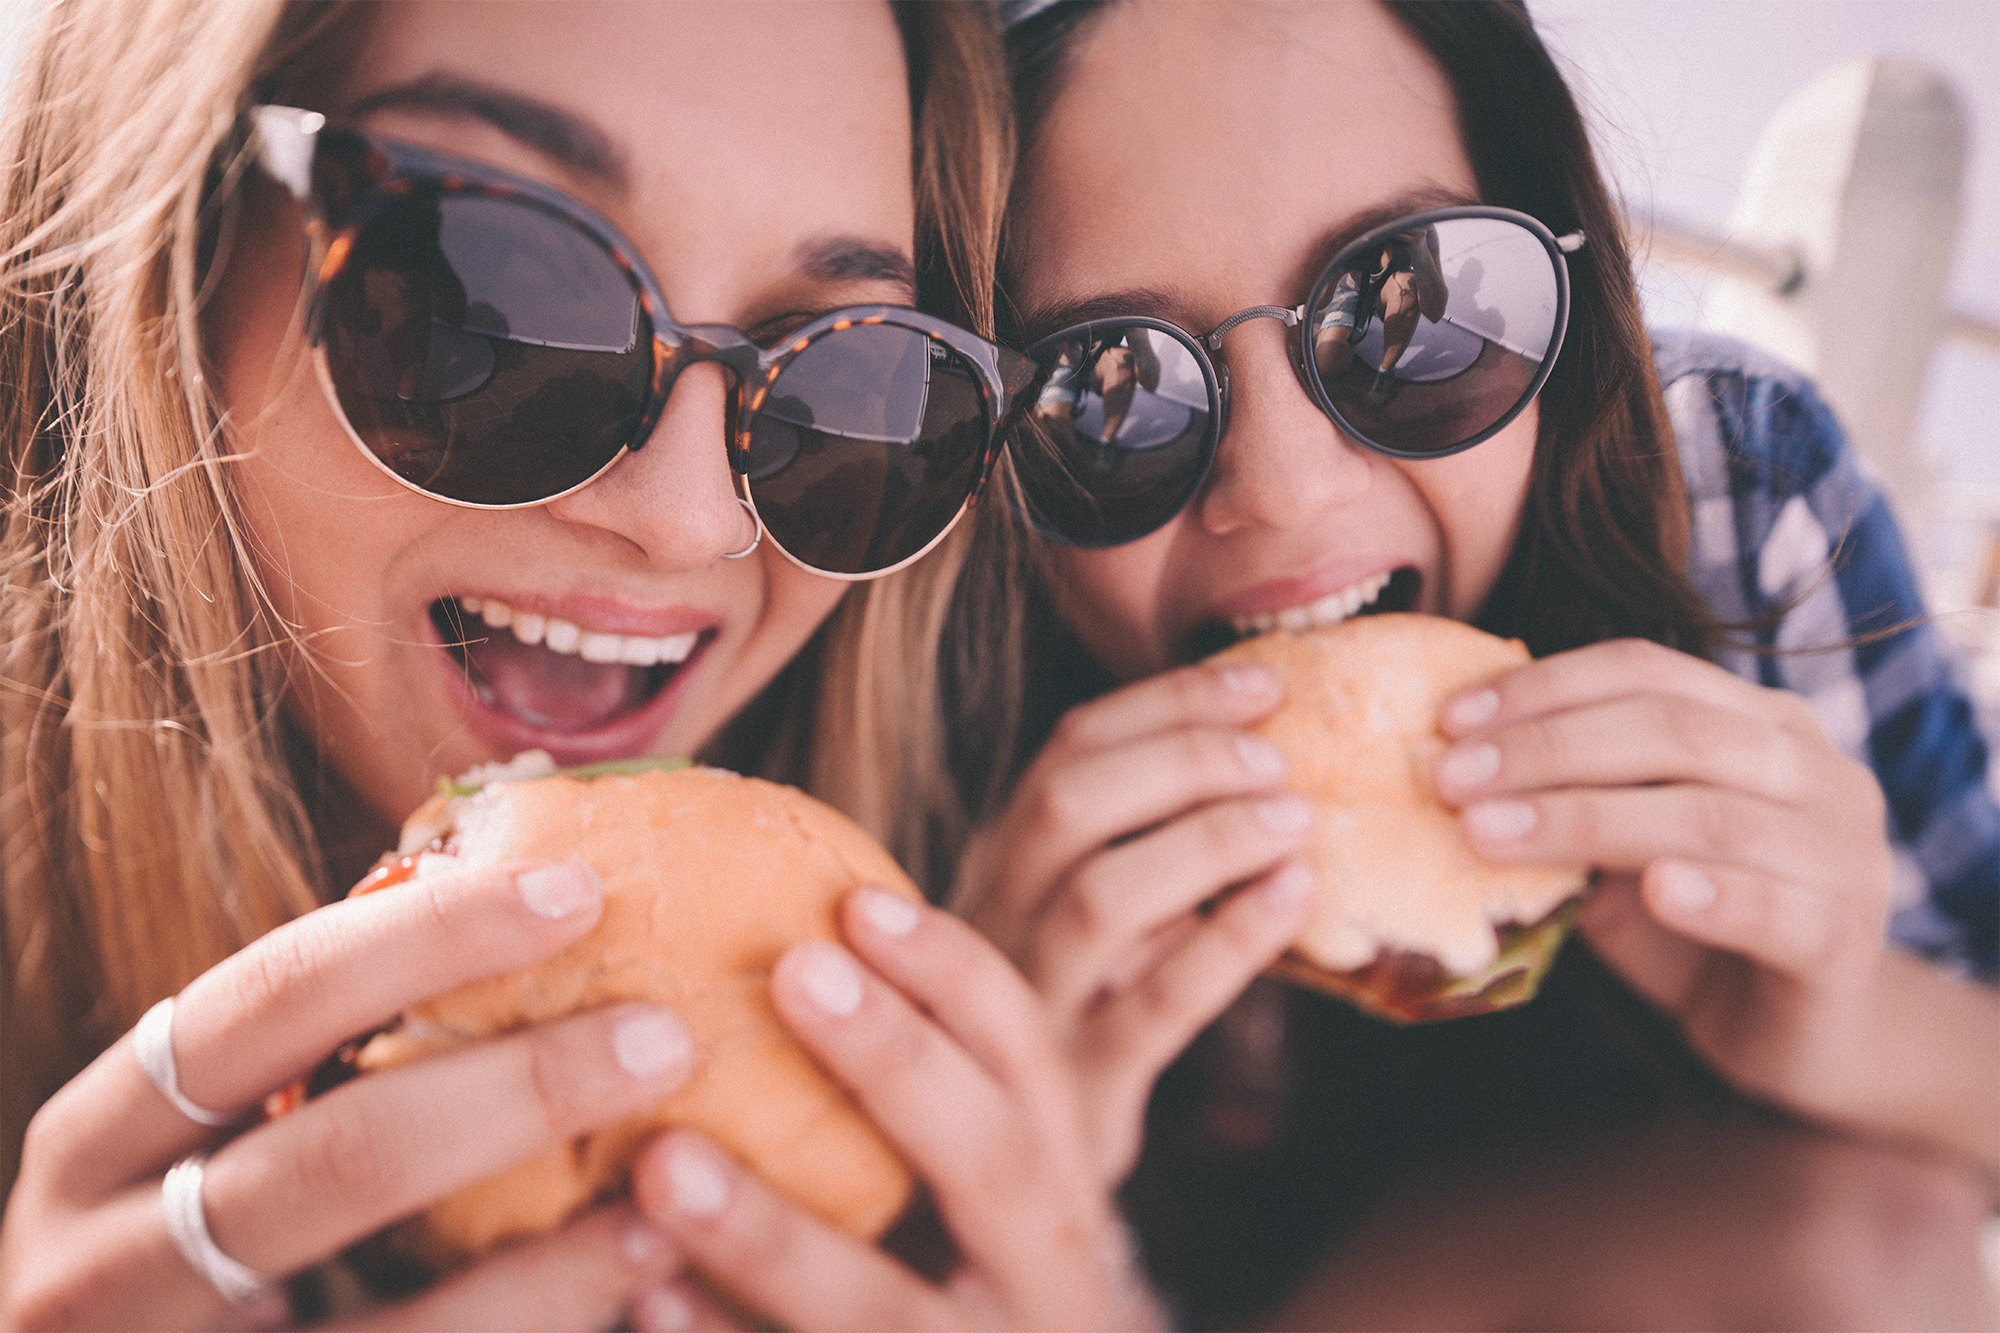 Closeup portrait of two teenage girls who are best friends, wearing hipster sunglasses about to take bites out of large burgers outdoors with a retro style develop